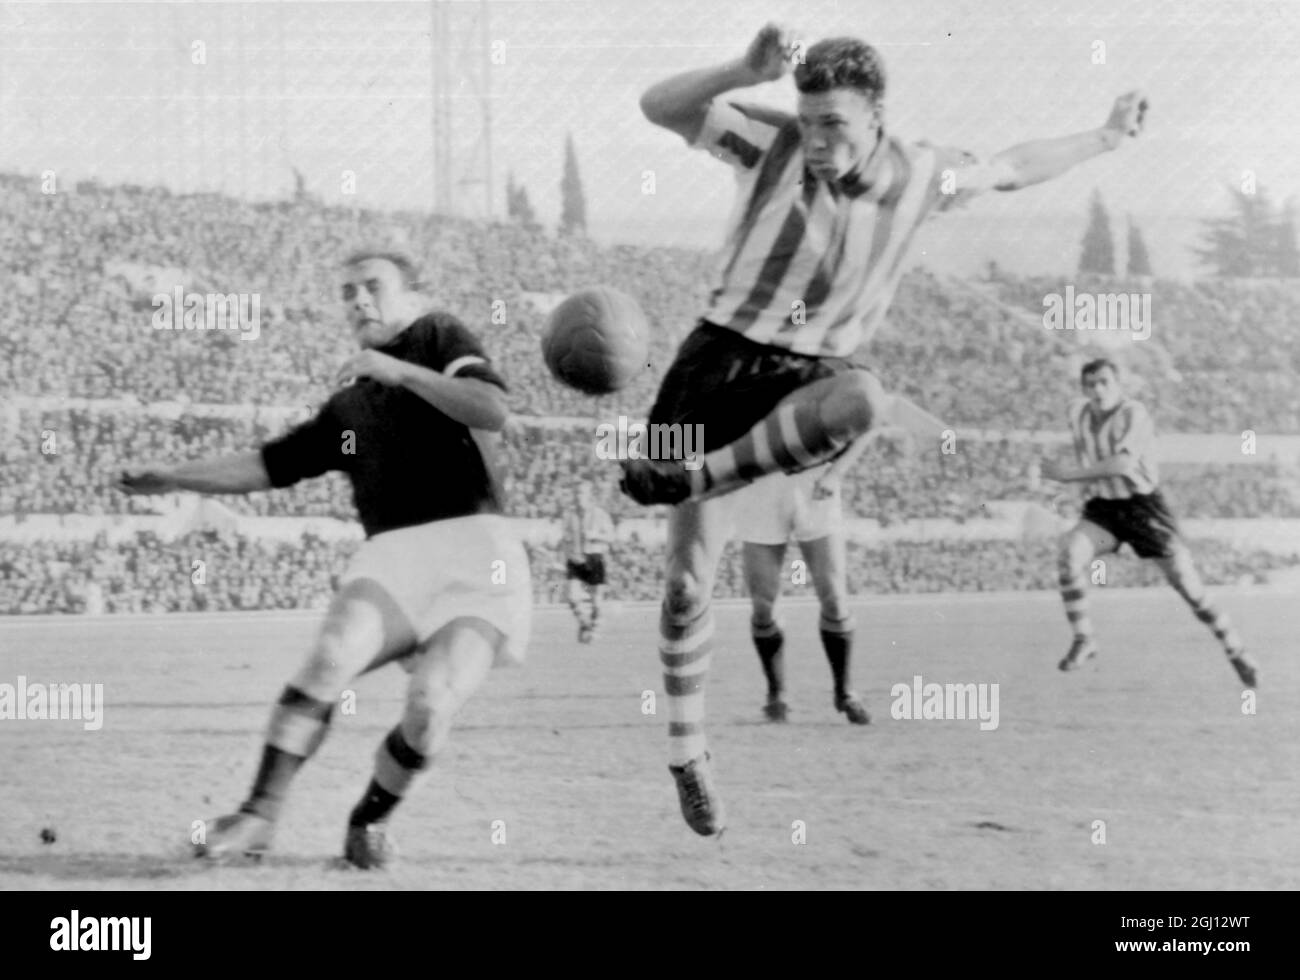 FOOTBALL INTER CITIES FAVS CUP SHEFFIELD MI V ROME YOUNG & LO 13. DEZEMBER 1961 Stockfoto